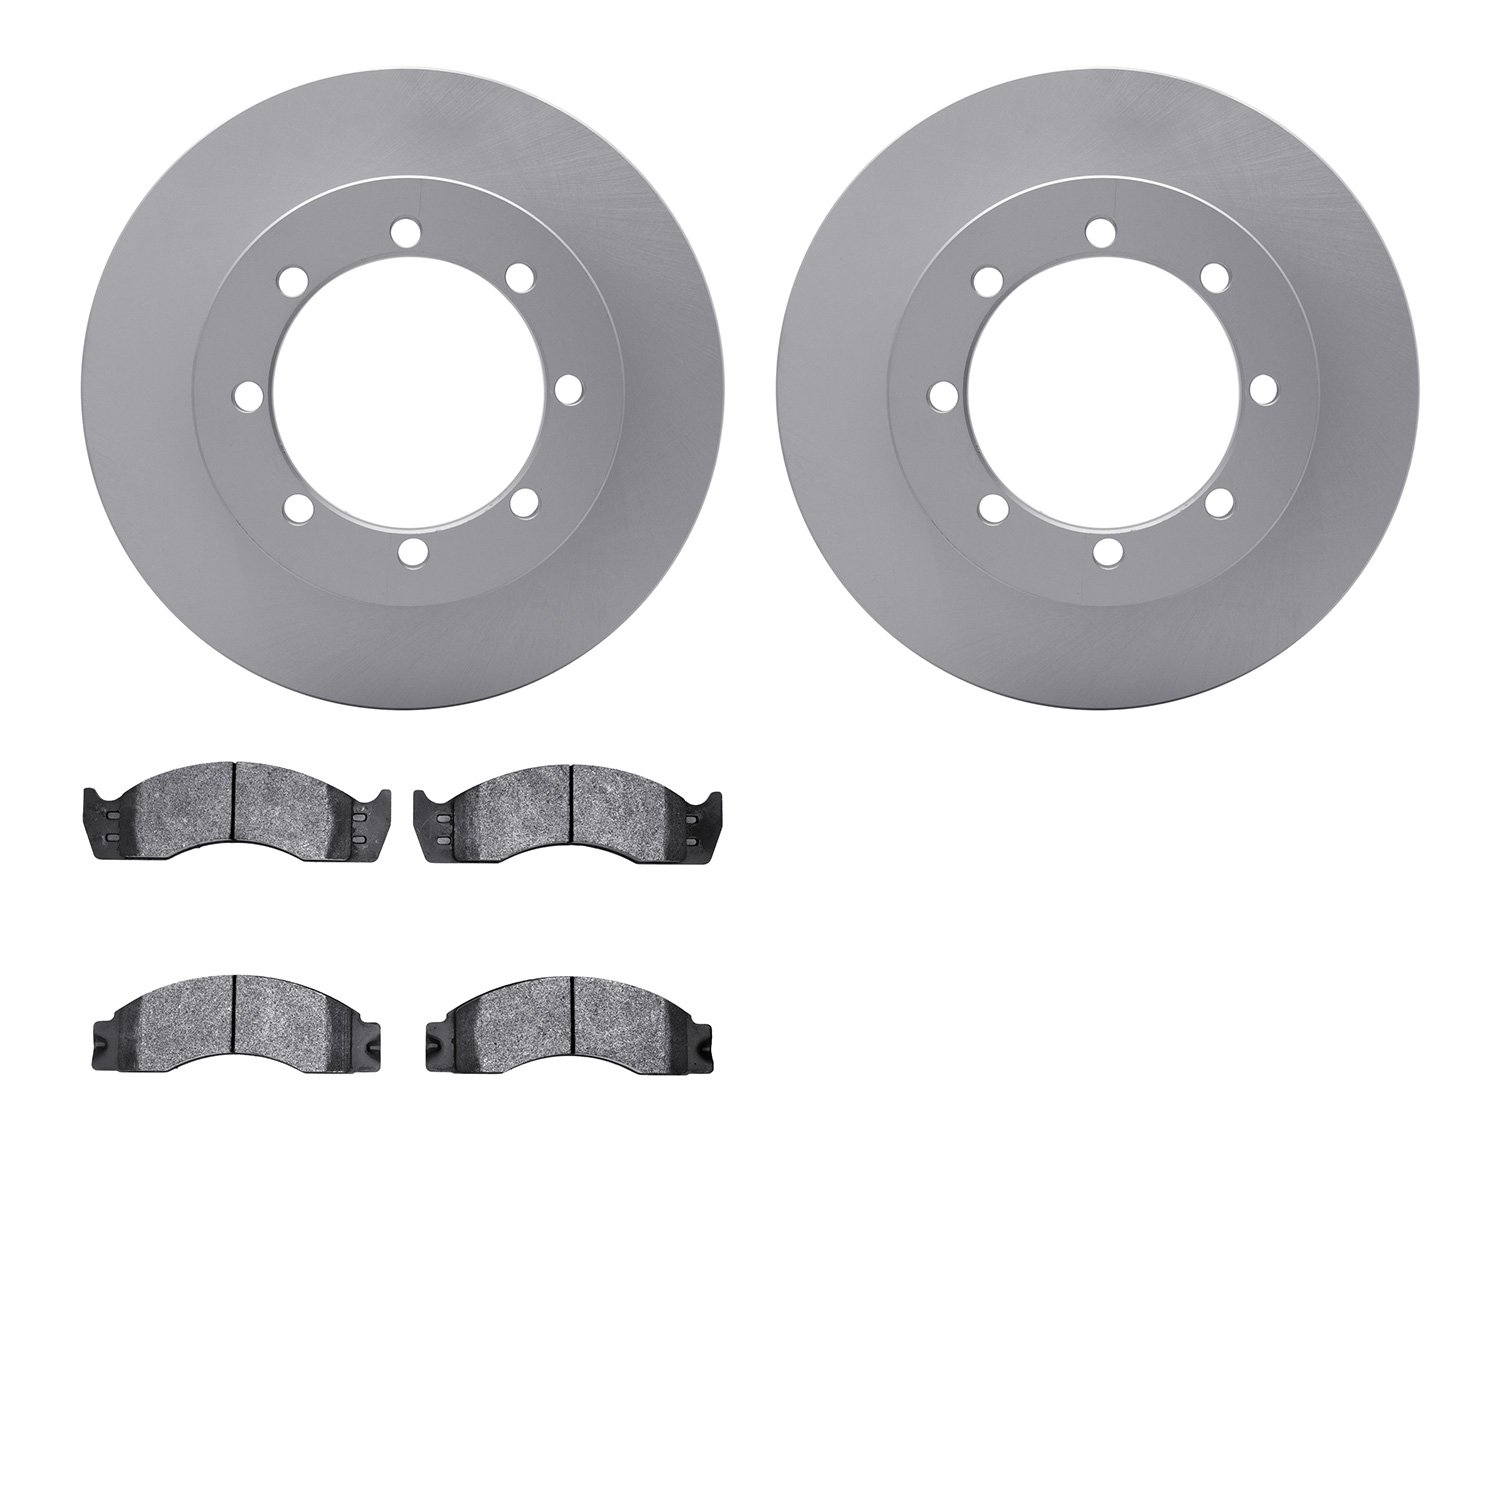 4402-54019 Geospec Brake Rotors with Ultimate-Duty Brake Pads Kit, 2003-2007 Ford/Lincoln/Mercury/Mazda, Position: Rear